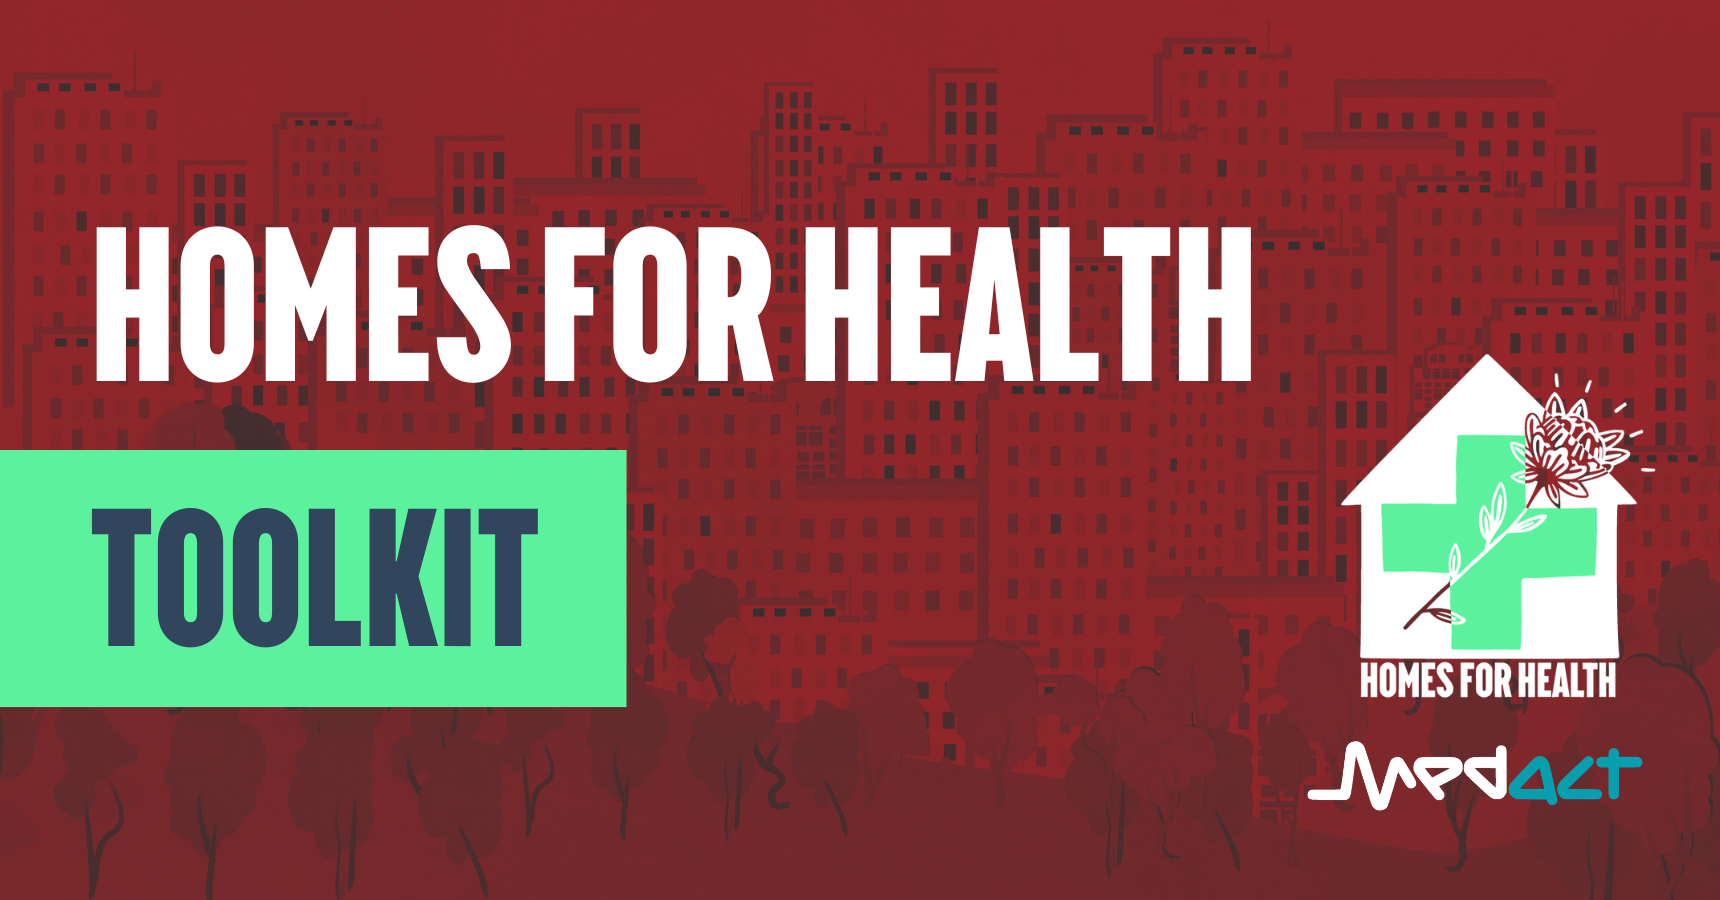 Homes for Health: Toolkit